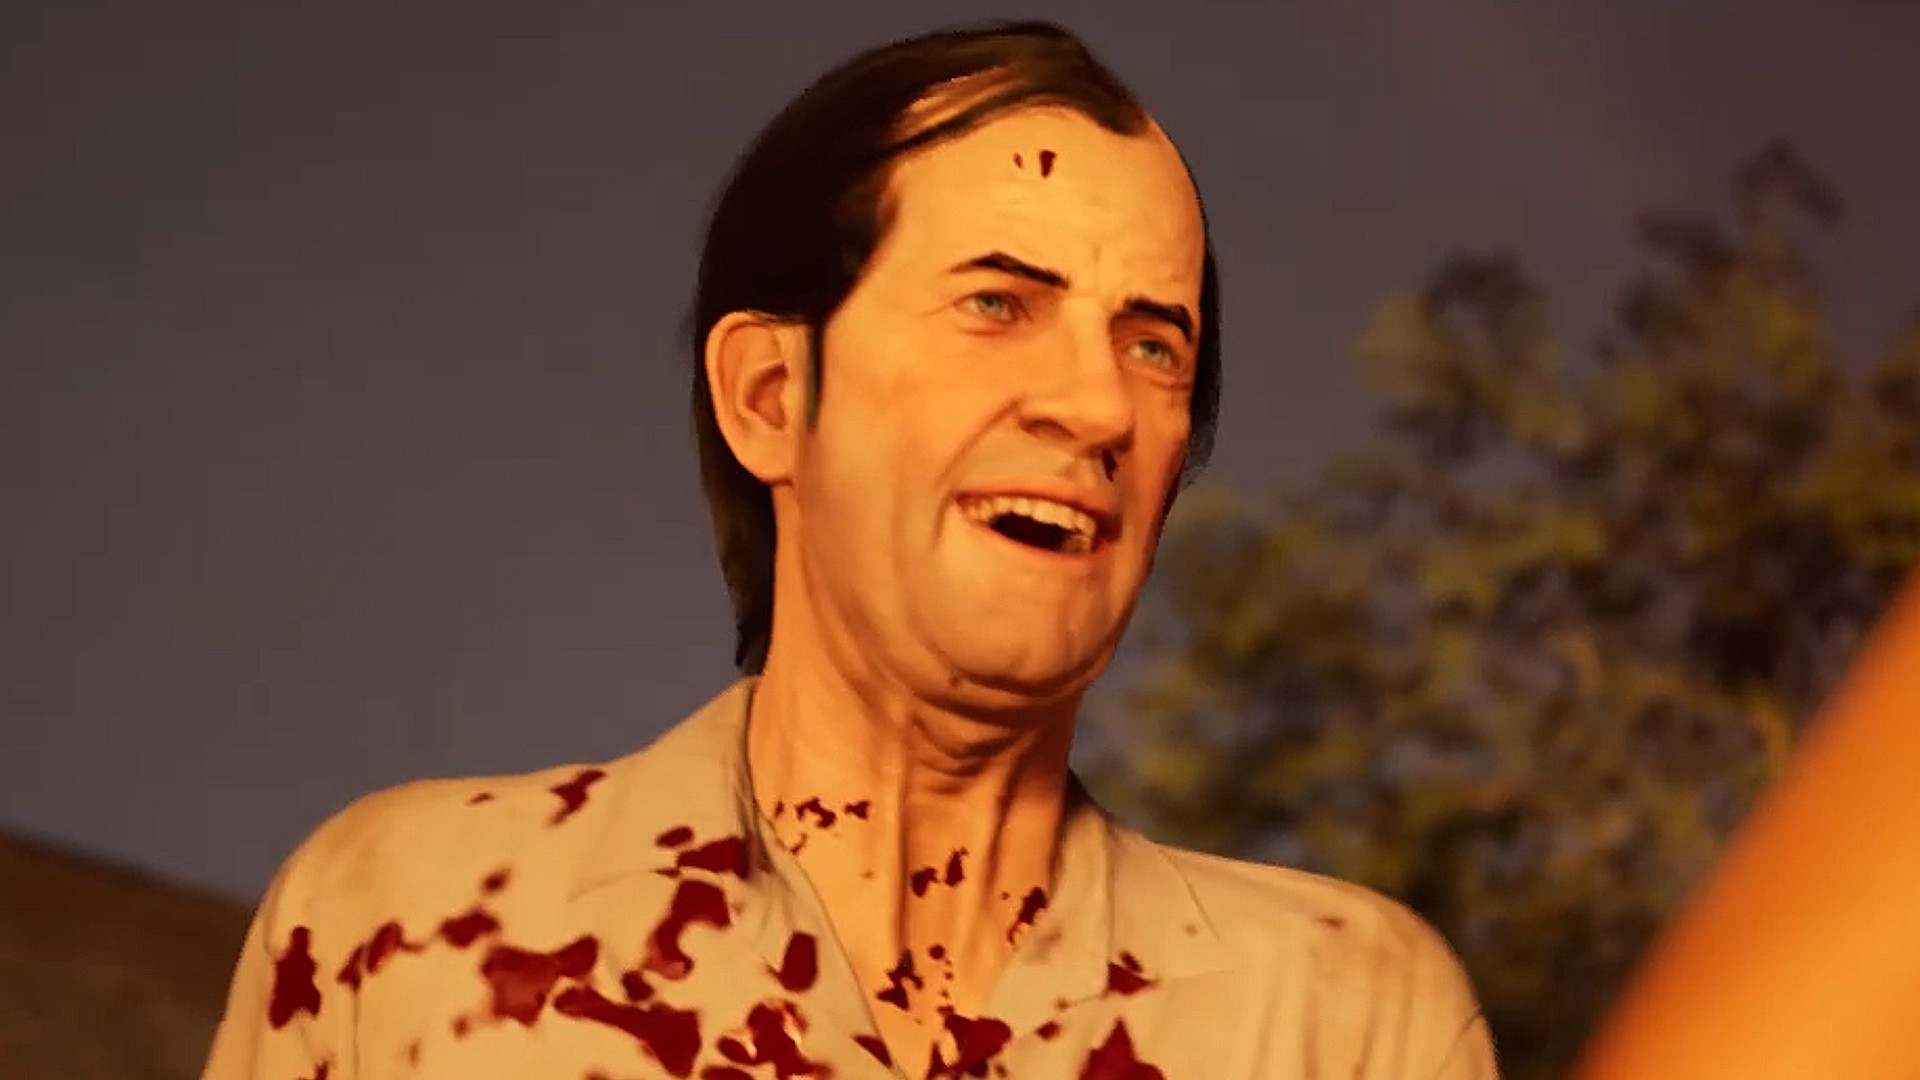 The Texas Chain Saw Massacre Game Review